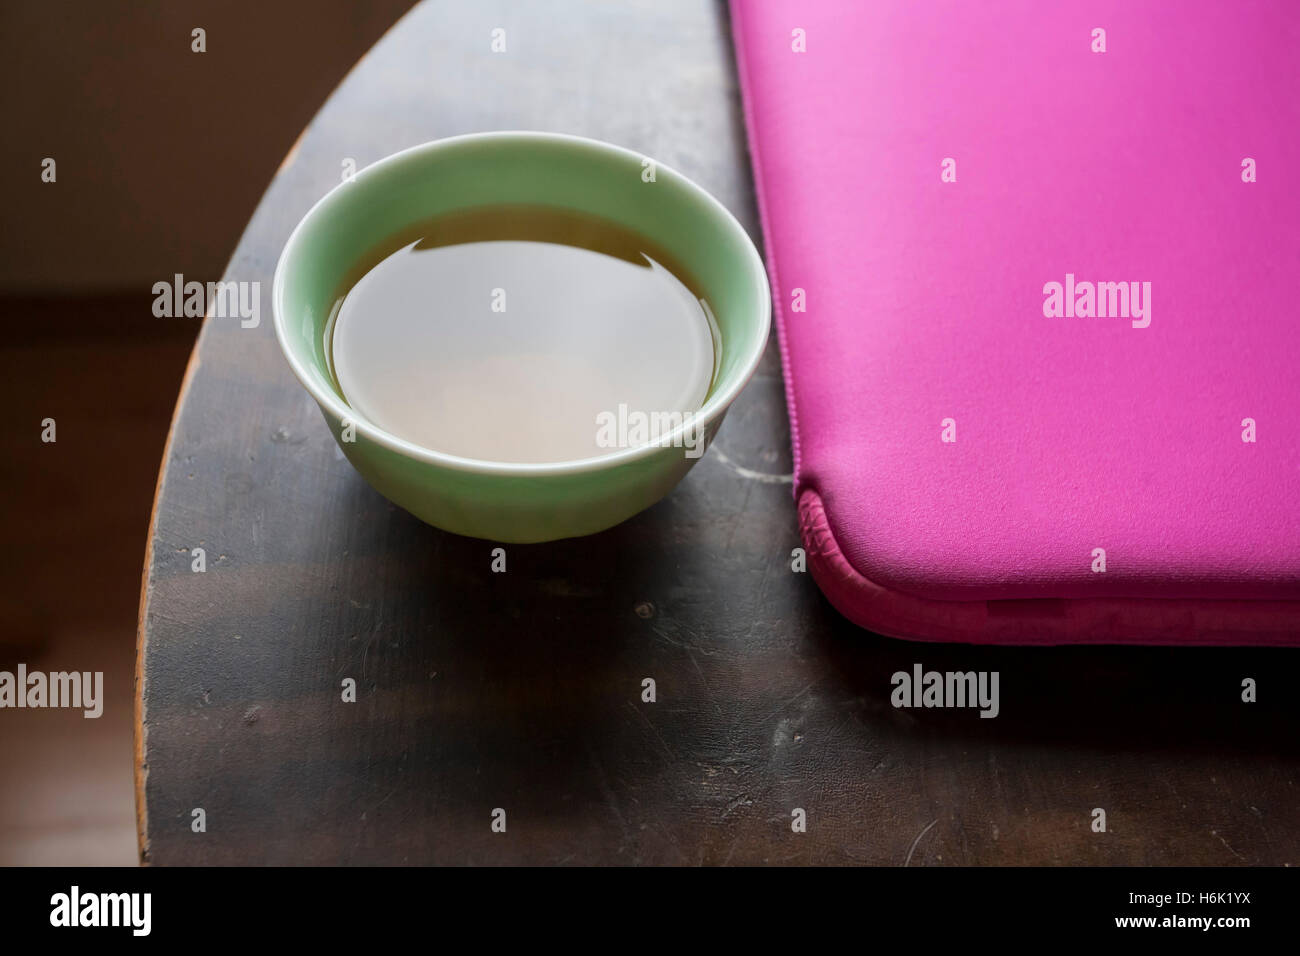 Green tea and Apple Mac Air Book in the pink case on the round table Stock Photo